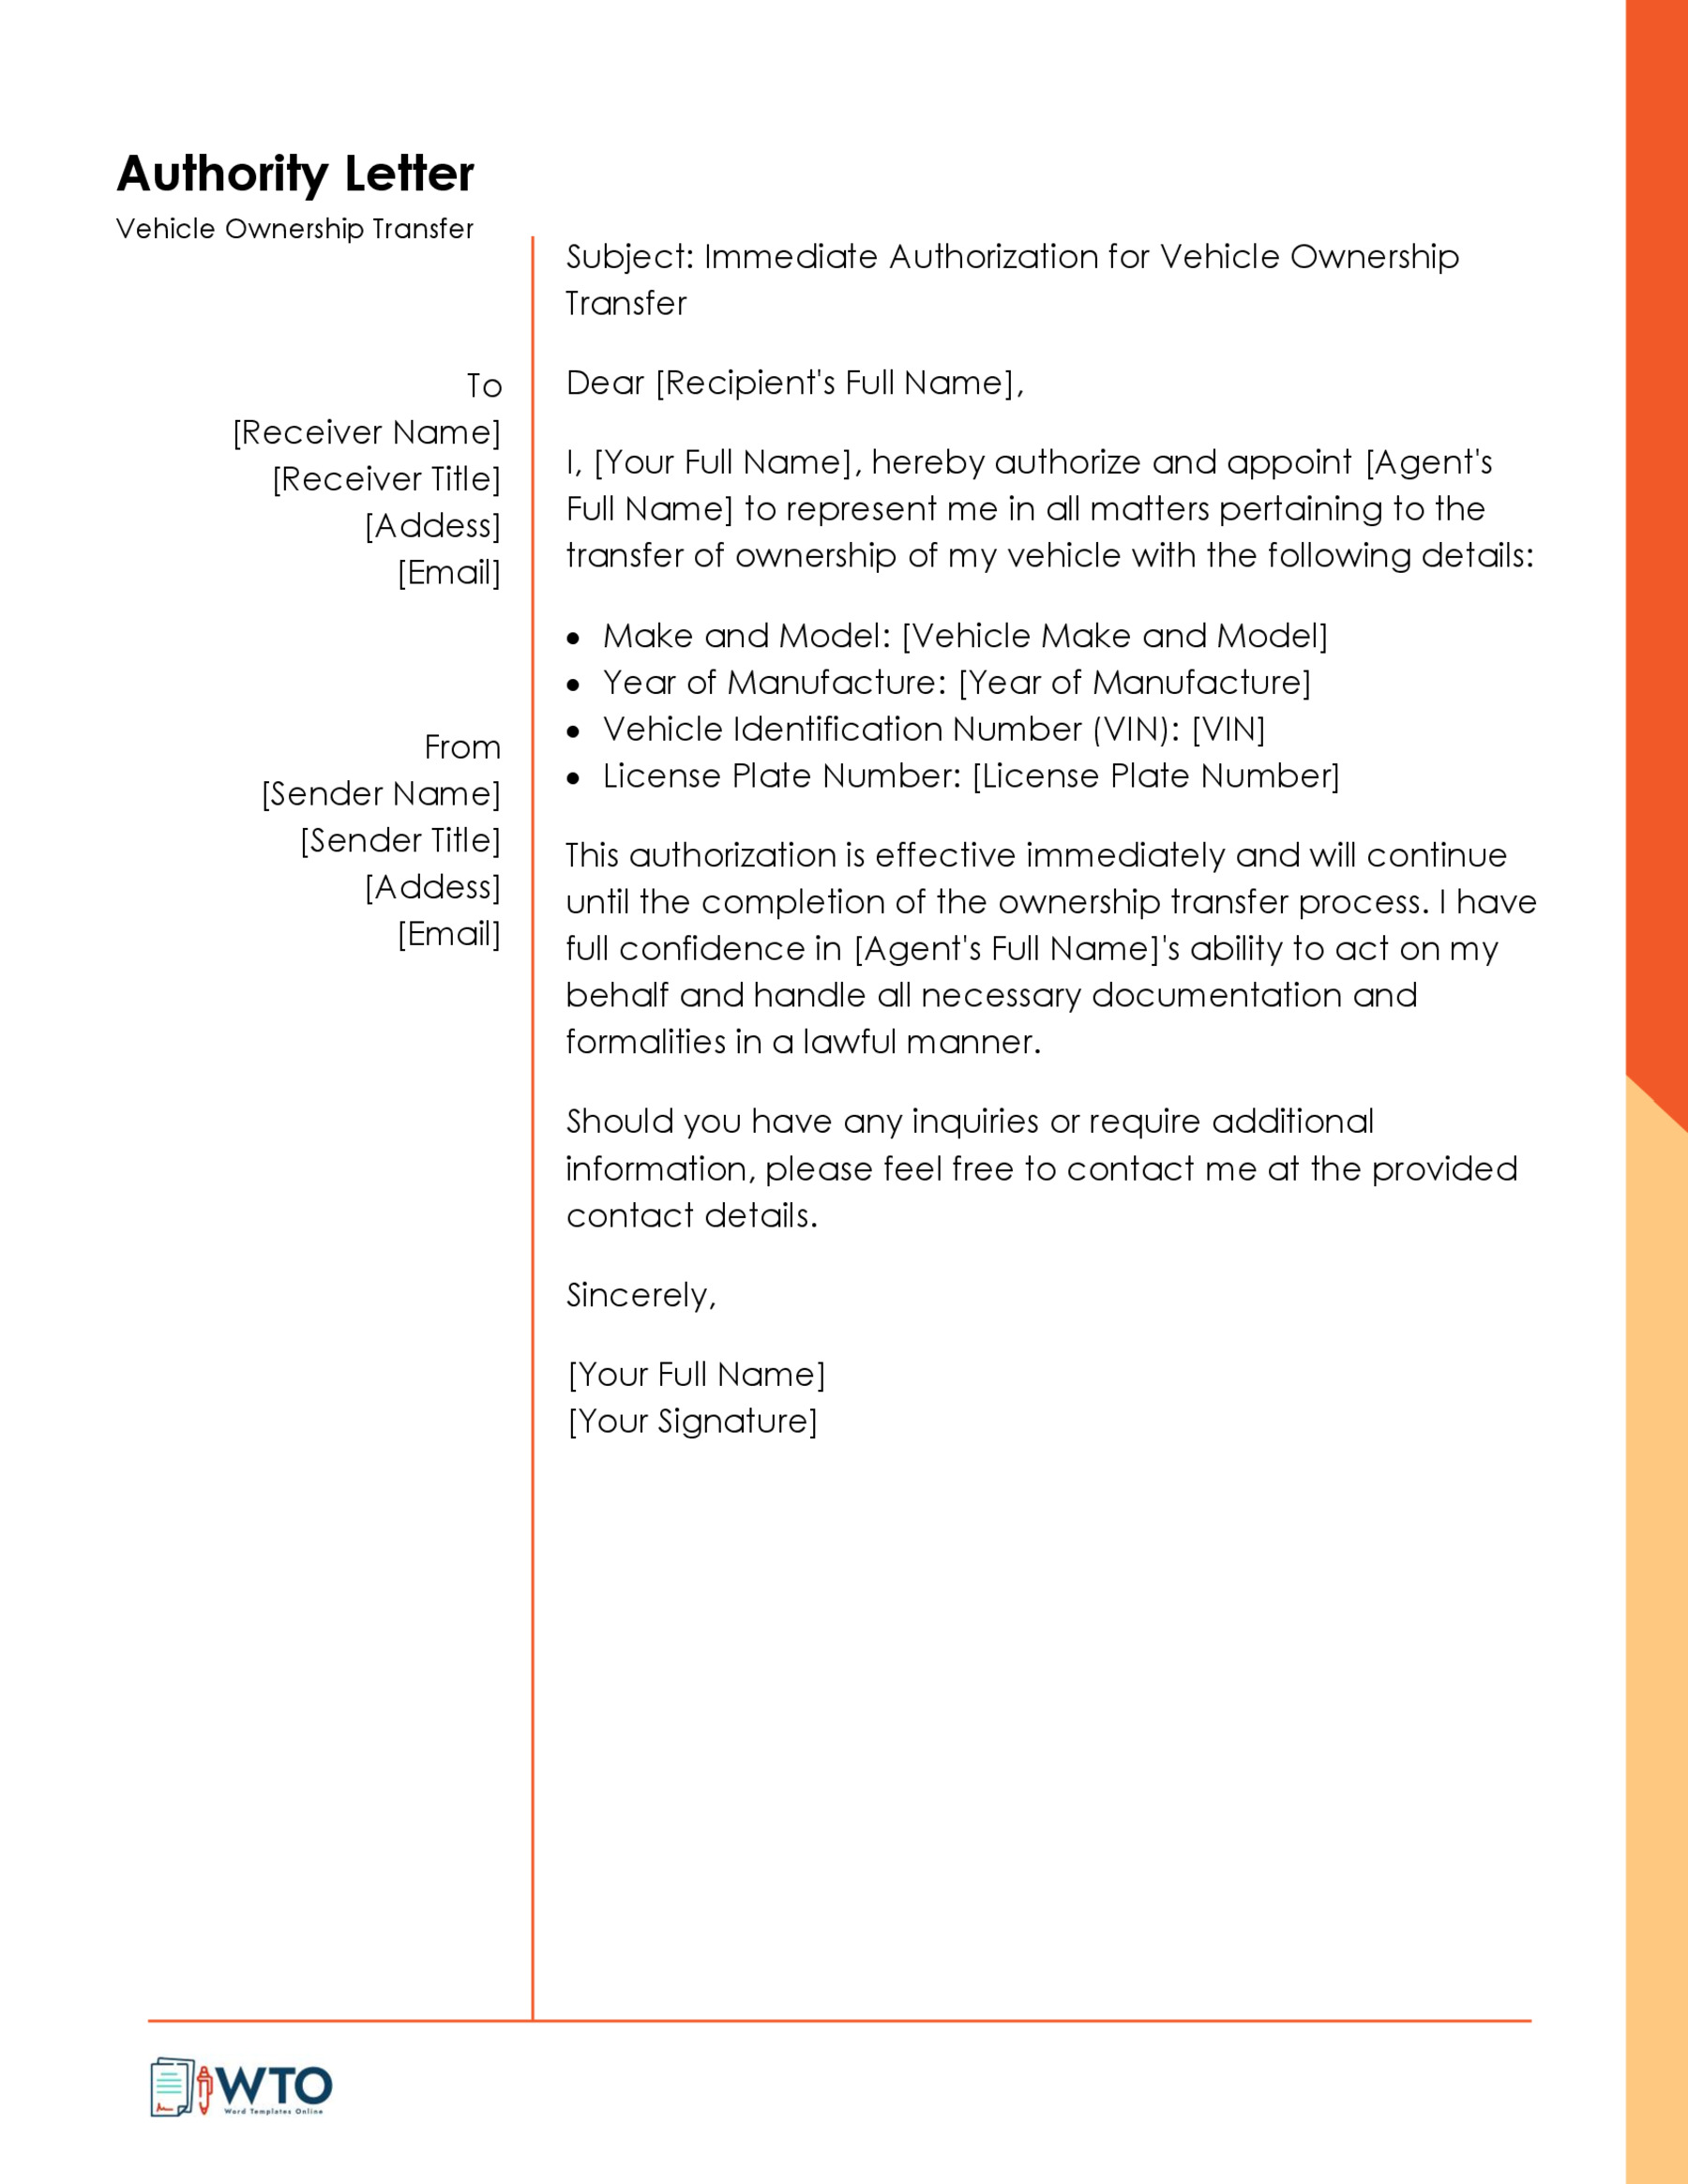 Authorization Letter Transfer Vehicle Ownership Letter Template-Free in Ms word